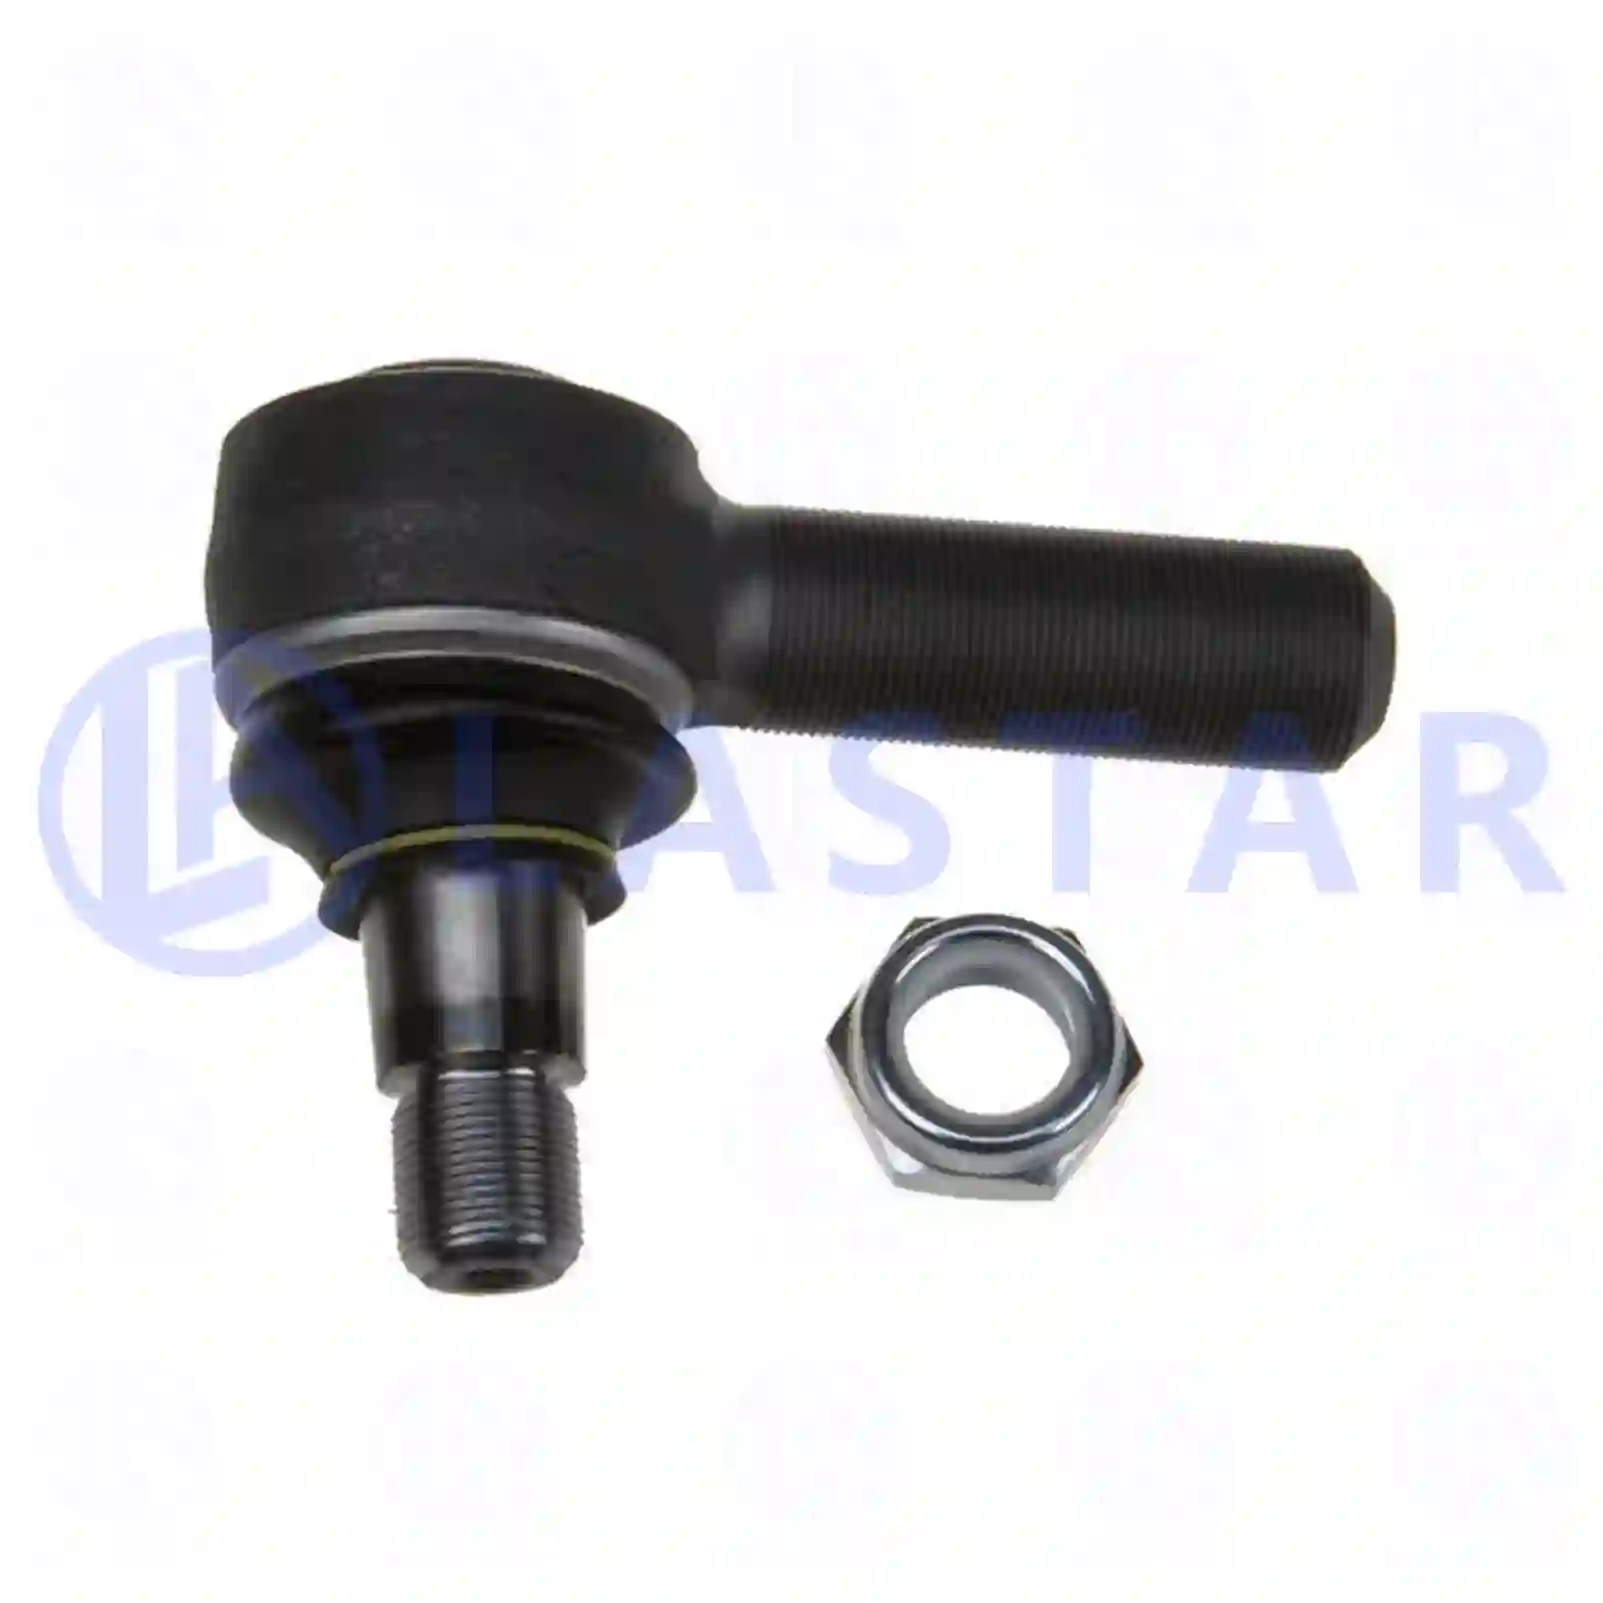 Ball joint, right hand thread, 77704973, 9P914836, 229872, 264074, 510053, 607981, 0069752, 0607981, 0696226, 0698450, 1142022, 1149907, 1152350, 1257890, 1603789, 1618048, 607981, 696226, 69752, 698450, ACHF060, F5045S, 655357, 6625413, 02966252, 02969808, 04311552, 04802443, 04833829, 07138967, 08122752, 3221270R91, 42483386, 42488269, 42489573, 42489594, 42491638, 42537936, 99708408375, Y04505003, 56811-7M000, 56811-7M100, 4030R11377, 02966252, 02969808, 04802443, 04833822, 04833829, 07138967, 08122752, 2966252, 2969808, 42483386, 42483388, 42488269, 42489573, 42489594, 42491638, 42537936, 42565955, 4802443, 4833822, 4833829, 5001858773, 801211835, 8122752, 93194576, 45/8M1380, 571866608, 725010008, 81953010016, 81953010075, 81953010084, 81953010088, 81953010094, 81953010103, 81953016012, 81953016030, 81953016043, 81953016048, 81953016049, 81953016053, 81953016061, 81953016090, 81953016100, 81953016108, 81953016112, 81953016126, 81953016143, 81953016149, 81953016154, 81953016156, 81953016168, 81953016178, 81953016194, 81953016206, 81953016224, 81953016234, 81953016242, 81953016252, 81953016274, 81953016278, 81953016284, 81953016308, 81953016310, 81953016312, 81953016347, 81953016350, 81953016352, 81953016374, 81953016014, 82953016012, 88953016014, 90804102156, 90804102272, 90804102696, 90804102710, N1011020300, N2953016001, 0003305248, 0003387310, 0003406169, 0003406251, 0003406254, 0003406260, 0003406261, 0003406326, 0004600348, 0004600948, 0004601048, 0004602848, 0004602948, 0004605235, 0004608948, 0004630218, 0004630418, 0004630518, 0004630618, 0014600248, 0014600848, 0014601248, 0014602248, 0014607748, 0014608048, 0024600148, 3503307235, 3503307435, 6851531000, 8226236059, 011019659, 014013769, 120325000, 122353202, 16H0007006AA, 0003406169, 0003406236, 0003406251, 0003406254, 0003406260, 0003406261, 5000240688, 5000242475, 5000242479, 5000242485, 5000253852, 5000275496, 5000288360, 5000590236, 5000804824, 5000819349, 5000858773, 5001836298, 5001858760, 5001858773, 5010832582, 7420894052, 7701011412, 1370720, 1420822, 1435746, 1435756, 1738381, 1767328, 1899667, 1914427, 2051166, 283784, 345118, 345188, 395010, 6851475000, 6851480000, 6851484000, 8226236059, 1605300183, 1605300184, 0801211835, 0820352140, 218633100116, 310310, 634301250, 20350395, 20742127, 20745043, 20821160, 20862494, 20894052, 85101766, 2V5422817A, ZG40364-0008 ||  77704973 Lastar Spare Part | Truck Spare Parts, Auotomotive Spare Parts Ball joint, right hand thread, 77704973, 9P914836, 229872, 264074, 510053, 607981, 0069752, 0607981, 0696226, 0698450, 1142022, 1149907, 1152350, 1257890, 1603789, 1618048, 607981, 696226, 69752, 698450, ACHF060, F5045S, 655357, 6625413, 02966252, 02969808, 04311552, 04802443, 04833829, 07138967, 08122752, 3221270R91, 42483386, 42488269, 42489573, 42489594, 42491638, 42537936, 99708408375, Y04505003, 56811-7M000, 56811-7M100, 4030R11377, 02966252, 02969808, 04802443, 04833822, 04833829, 07138967, 08122752, 2966252, 2969808, 42483386, 42483388, 42488269, 42489573, 42489594, 42491638, 42537936, 42565955, 4802443, 4833822, 4833829, 5001858773, 801211835, 8122752, 93194576, 45/8M1380, 571866608, 725010008, 81953010016, 81953010075, 81953010084, 81953010088, 81953010094, 81953010103, 81953016012, 81953016030, 81953016043, 81953016048, 81953016049, 81953016053, 81953016061, 81953016090, 81953016100, 81953016108, 81953016112, 81953016126, 81953016143, 81953016149, 81953016154, 81953016156, 81953016168, 81953016178, 81953016194, 81953016206, 81953016224, 81953016234, 81953016242, 81953016252, 81953016274, 81953016278, 81953016284, 81953016308, 81953016310, 81953016312, 81953016347, 81953016350, 81953016352, 81953016374, 81953016014, 82953016012, 88953016014, 90804102156, 90804102272, 90804102696, 90804102710, N1011020300, N2953016001, 0003305248, 0003387310, 0003406169, 0003406251, 0003406254, 0003406260, 0003406261, 0003406326, 0004600348, 0004600948, 0004601048, 0004602848, 0004602948, 0004605235, 0004608948, 0004630218, 0004630418, 0004630518, 0004630618, 0014600248, 0014600848, 0014601248, 0014602248, 0014607748, 0014608048, 0024600148, 3503307235, 3503307435, 6851531000, 8226236059, 011019659, 014013769, 120325000, 122353202, 16H0007006AA, 0003406169, 0003406236, 0003406251, 0003406254, 0003406260, 0003406261, 5000240688, 5000242475, 5000242479, 5000242485, 5000253852, 5000275496, 5000288360, 5000590236, 5000804824, 5000819349, 5000858773, 5001836298, 5001858760, 5001858773, 5010832582, 7420894052, 7701011412, 1370720, 1420822, 1435746, 1435756, 1738381, 1767328, 1899667, 1914427, 2051166, 283784, 345118, 345188, 395010, 6851475000, 6851480000, 6851484000, 8226236059, 1605300183, 1605300184, 0801211835, 0820352140, 218633100116, 310310, 634301250, 20350395, 20742127, 20745043, 20821160, 20862494, 20894052, 85101766, 2V5422817A, ZG40364-0008 ||  77704973 Lastar Spare Part | Truck Spare Parts, Auotomotive Spare Parts